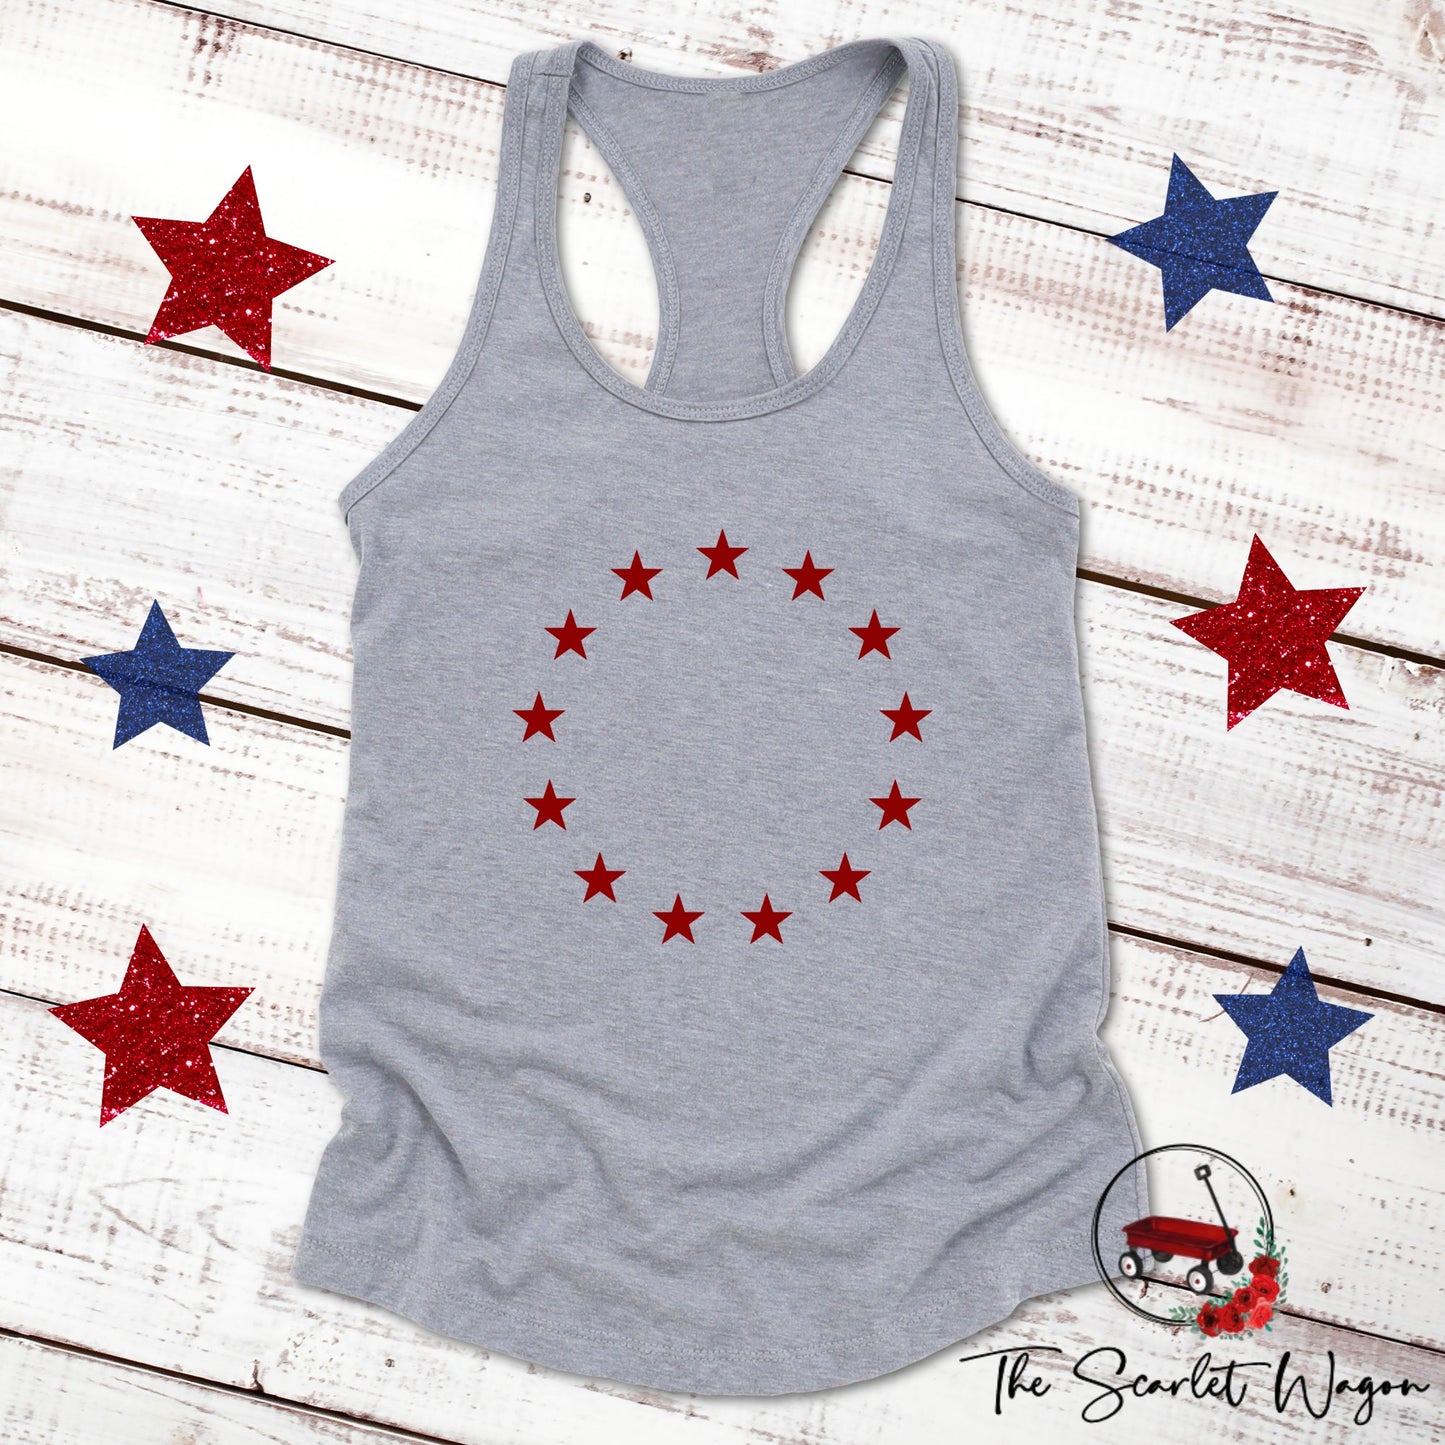 Betsy Ross Flag Women's Racerback Tank Patriotic Shirt The Scarlet Wagon Boutique Heather Gray Small 